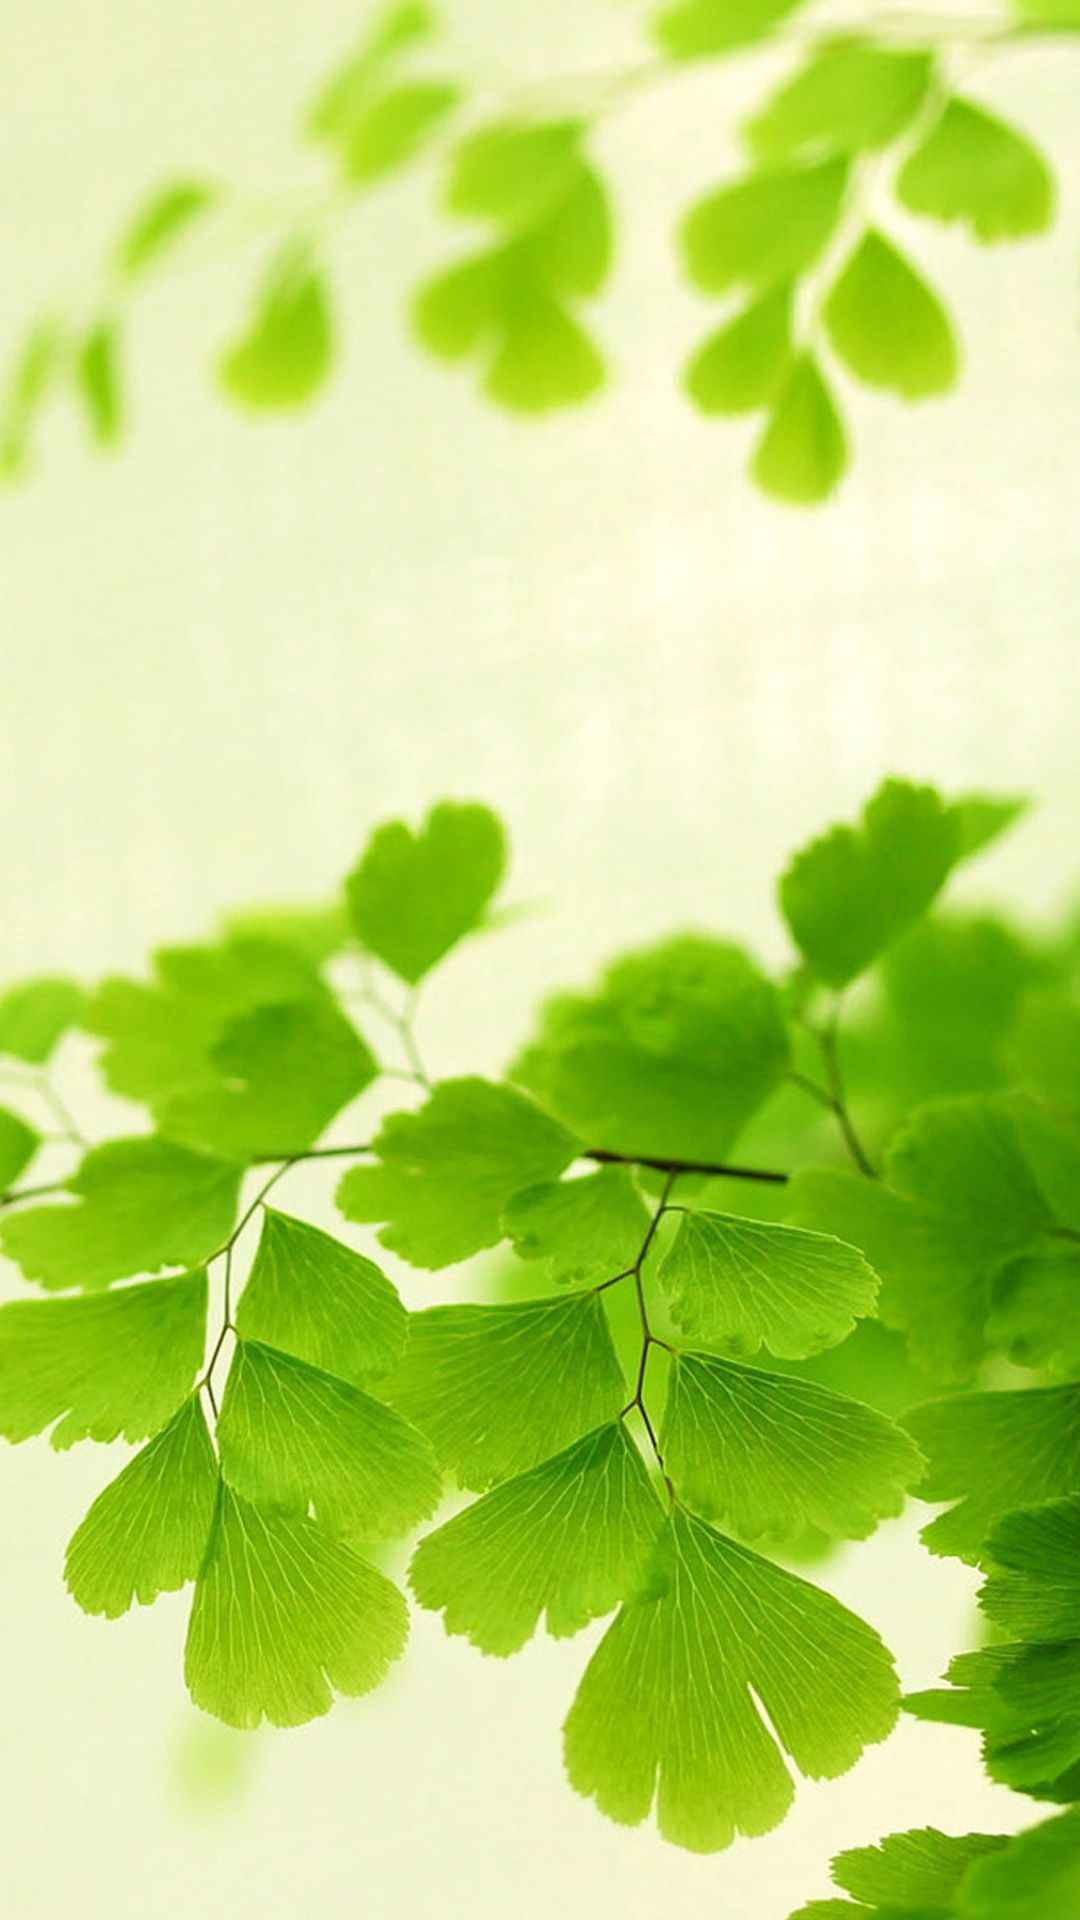 Nature Bright Ginkgo Tree Branch Leaves iPhone 6 Wallpaper Download. iPhone Wallpaper, iPad. iPhone 5s wallpaper, iPhone background wallpaper, iPhone wallpaper